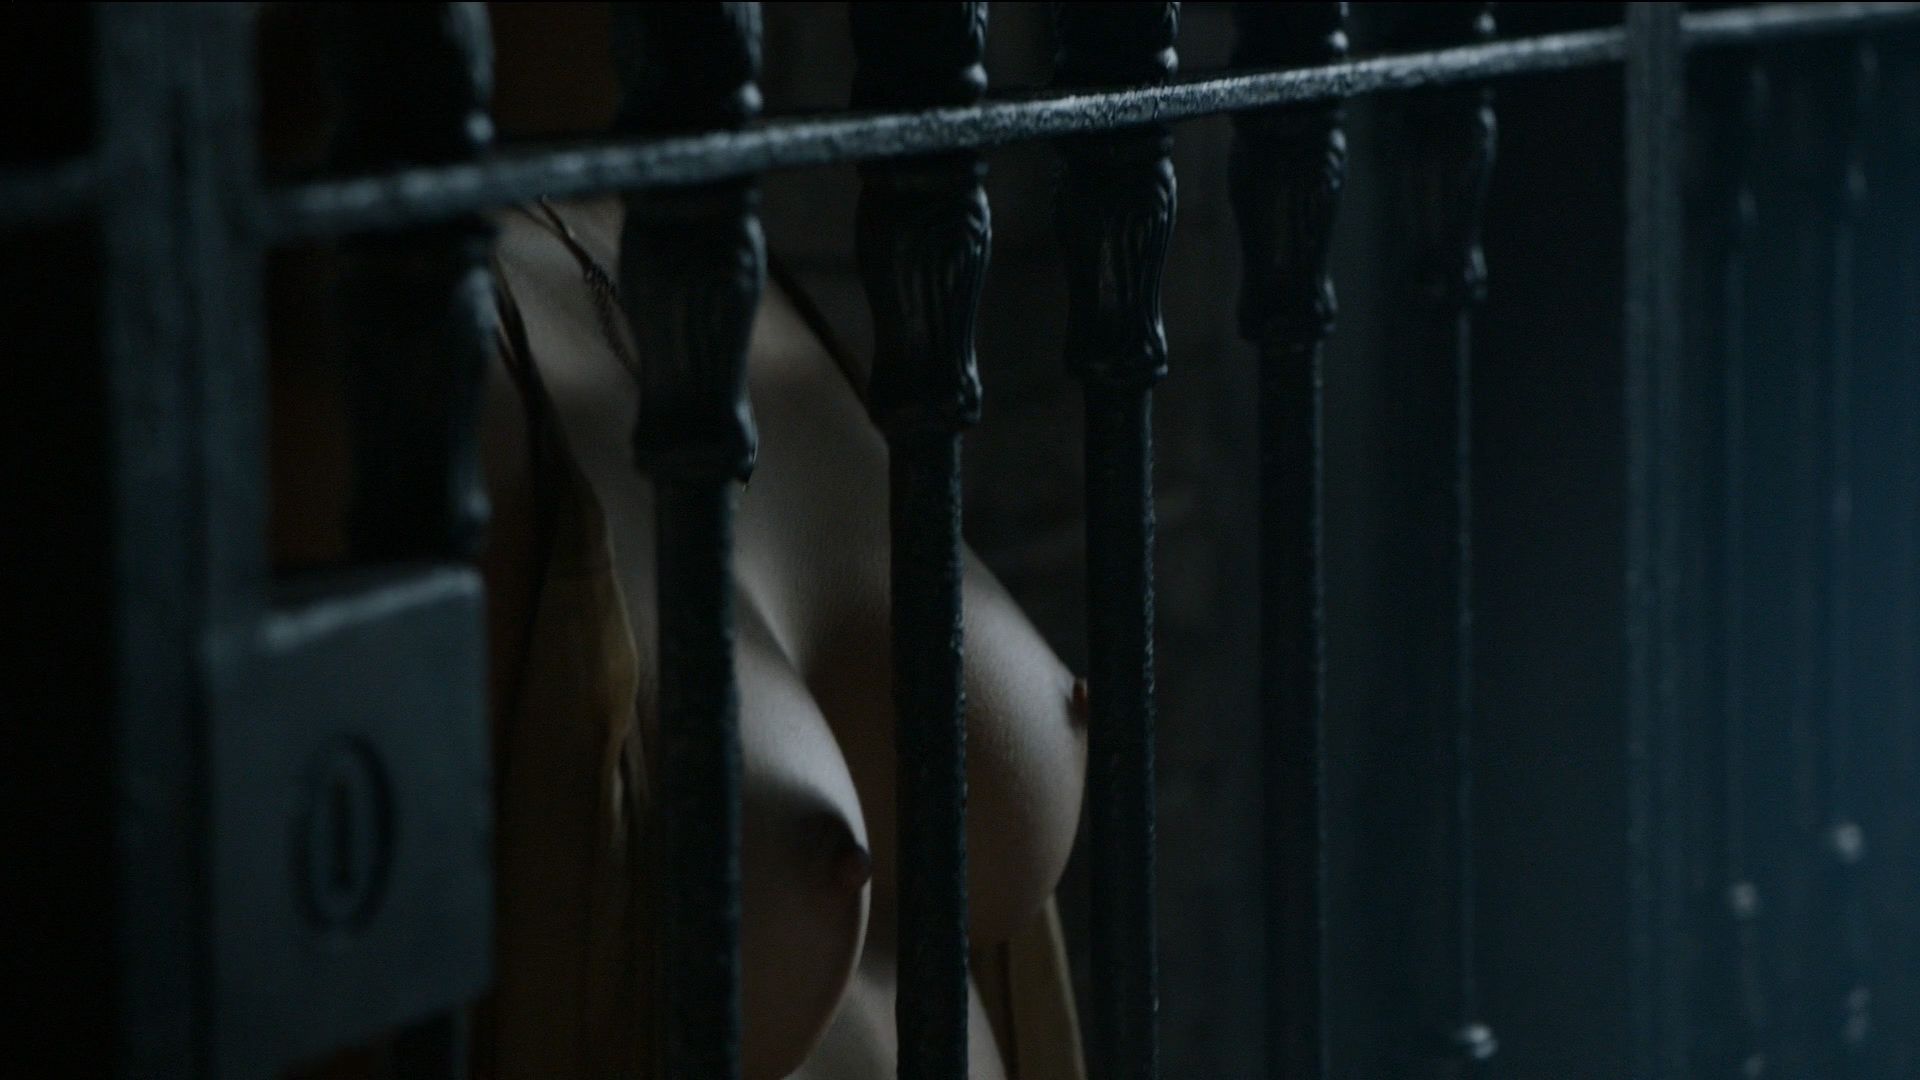 Rosabell Laurenti Sellers Nude  - Game of Thrones (2015) s05e07  - HD 1080p